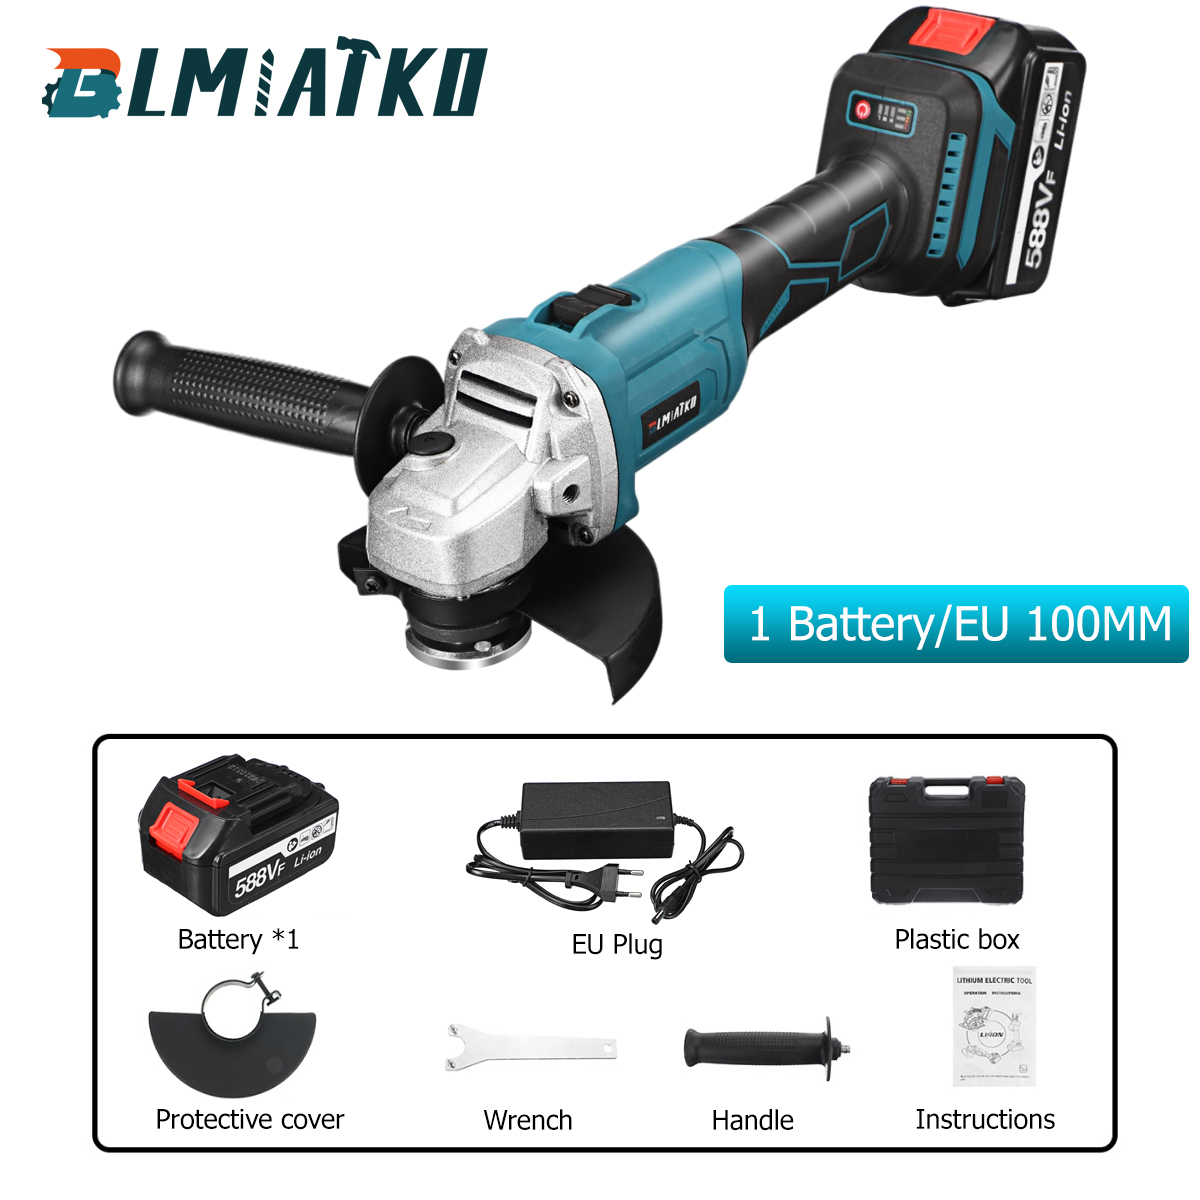 BLMIATKO-220V-125MM-100MM-34-Speed-Brushless-Electric-Angle-Grinder-Cutting-Grinding-Machine-Power-T-1943200-13